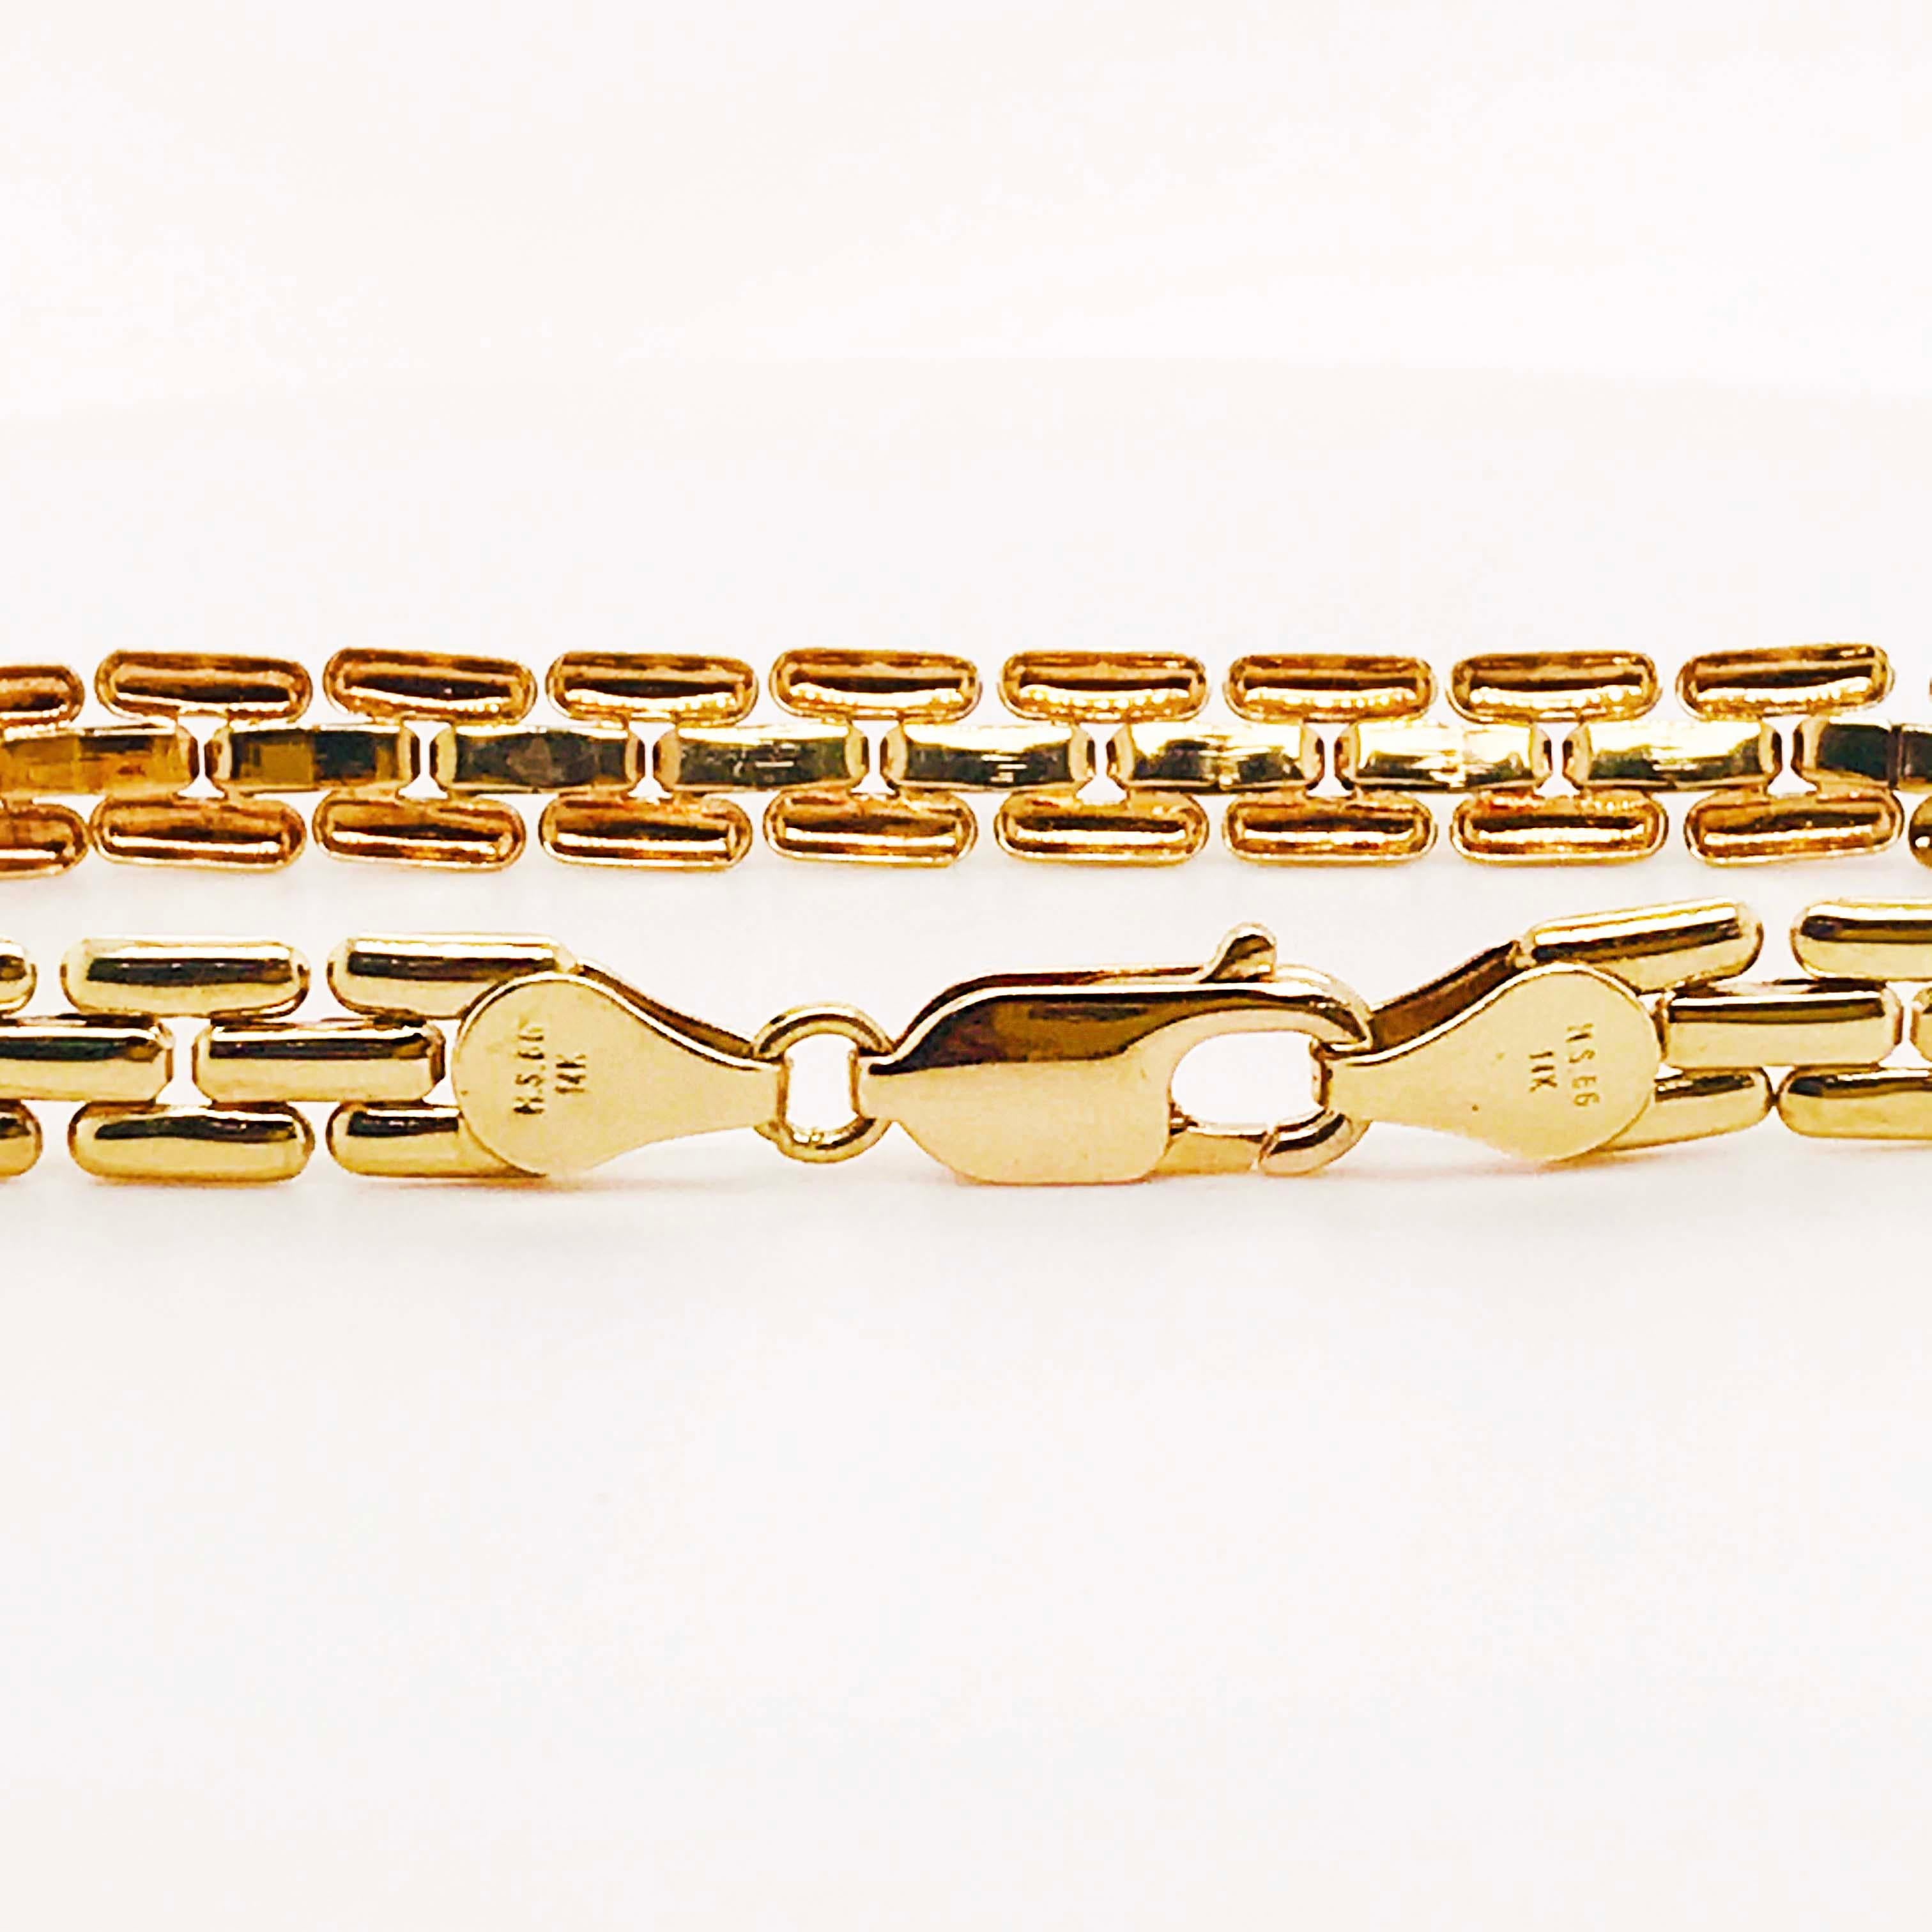 Gold Panther Chain Bracelet with Large Lobster Clasp, 14 Karat Yellow Gold 8